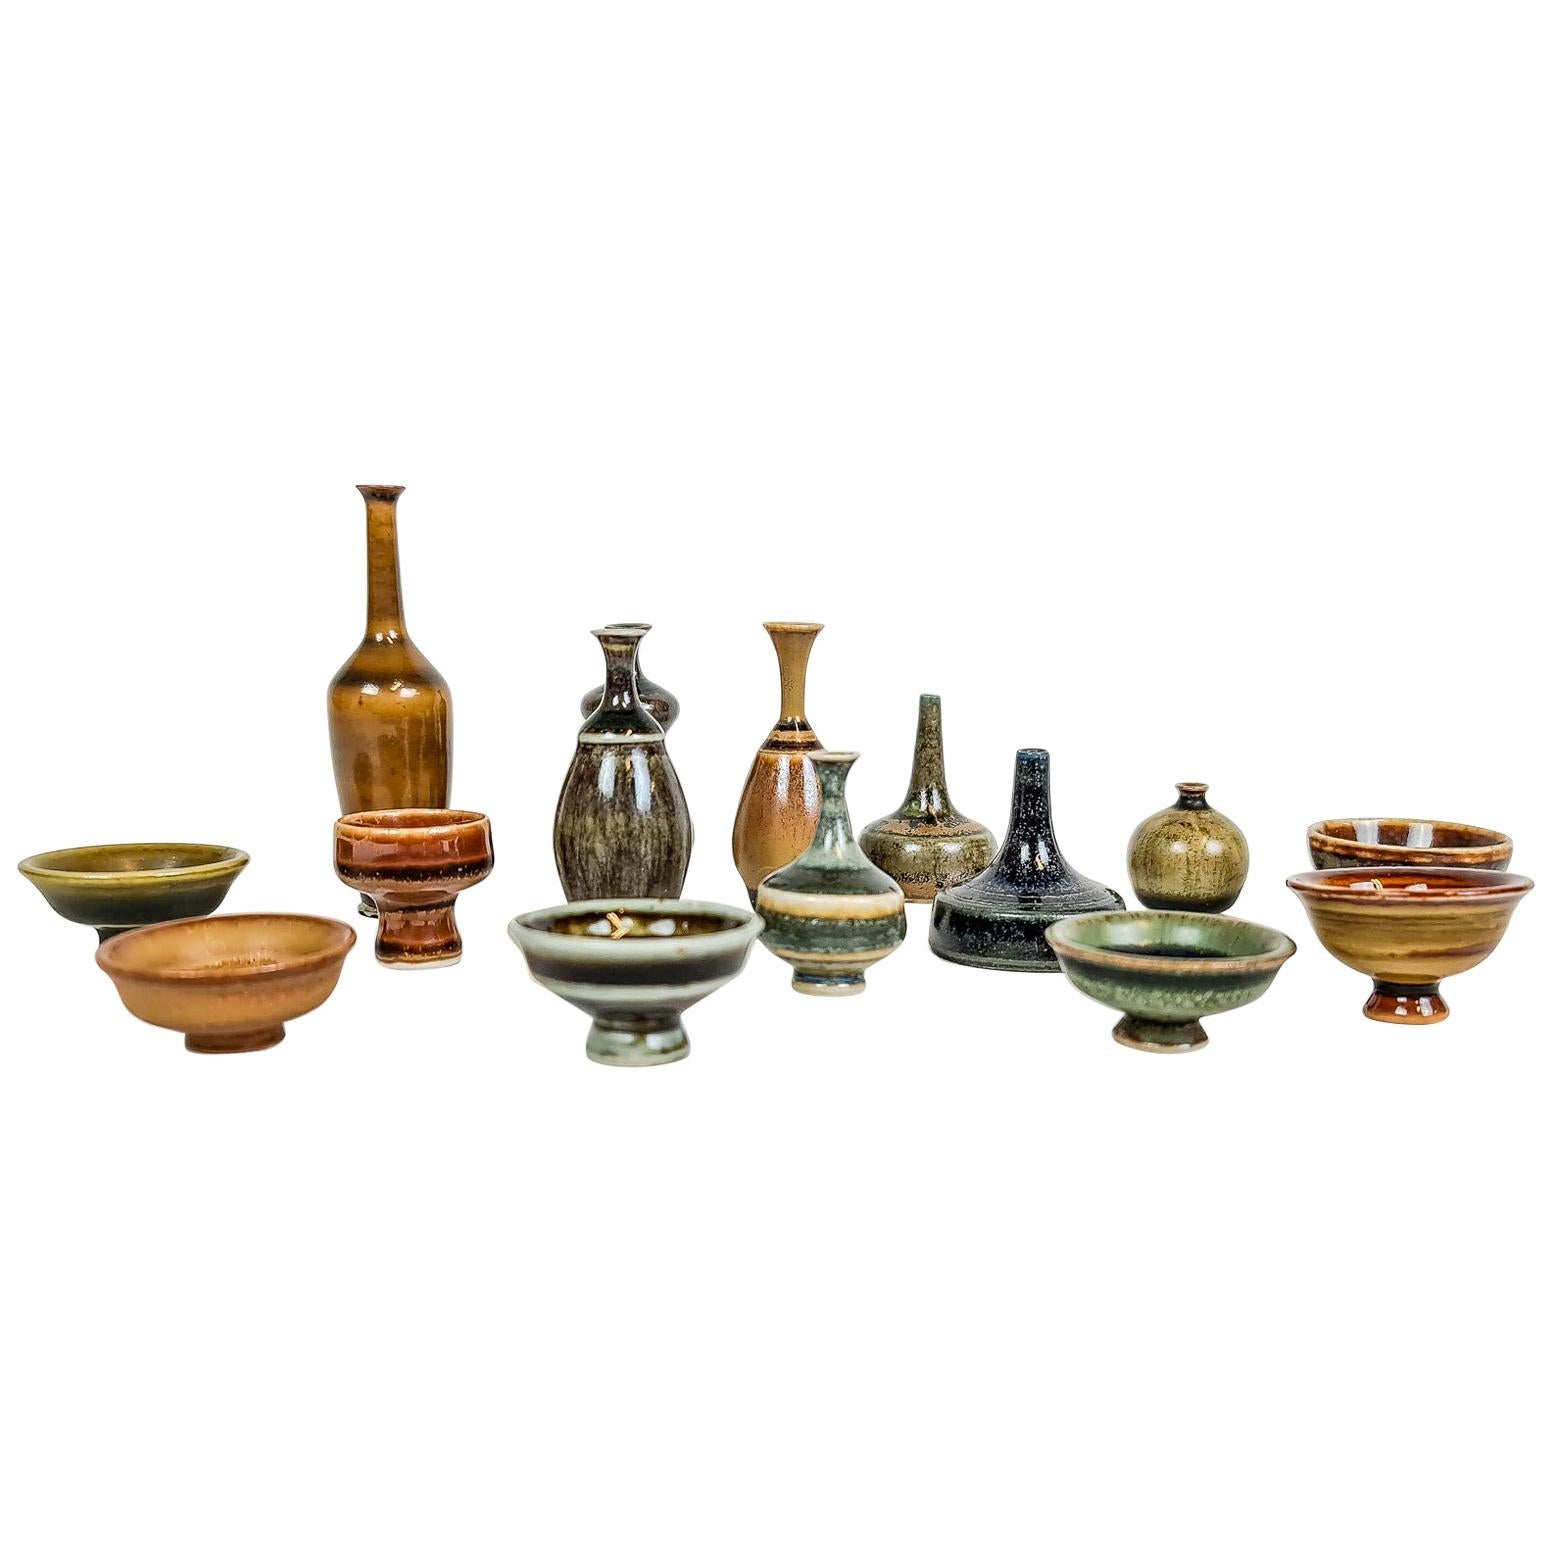 Collection of Miniatures Ceramic Pieces from Höganäs, Sweden